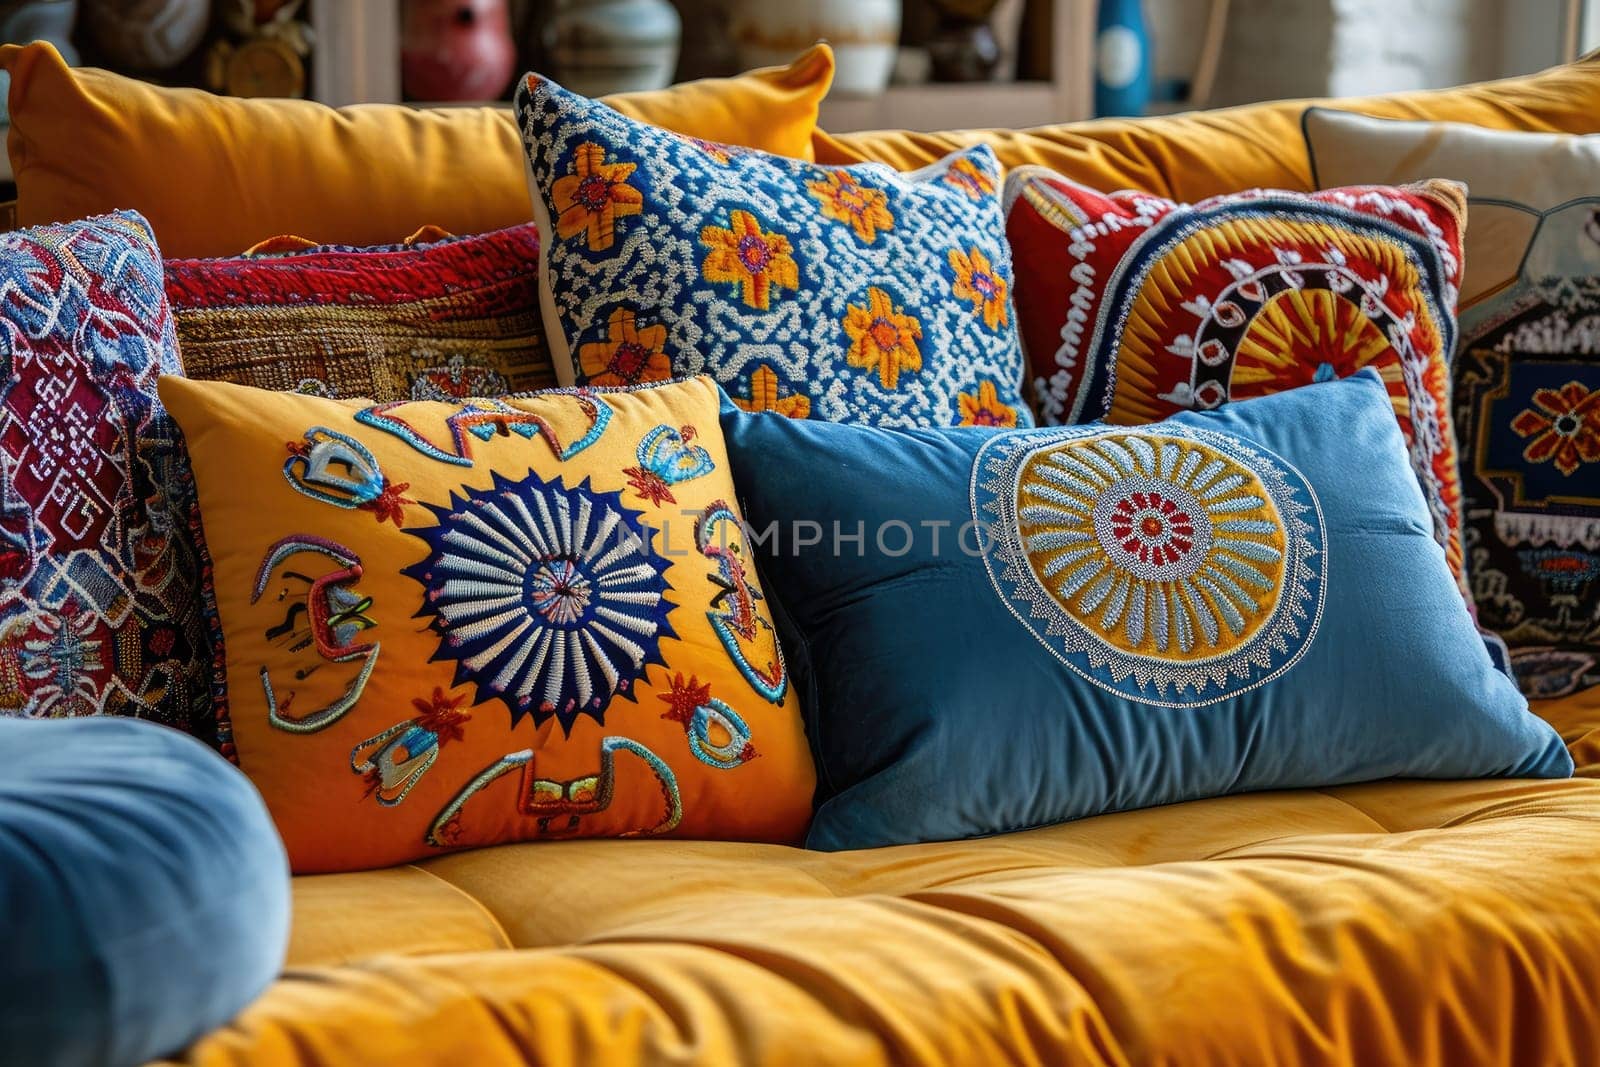 Exquisite sofa cushions in oriental style will create coziness and warmth in your home